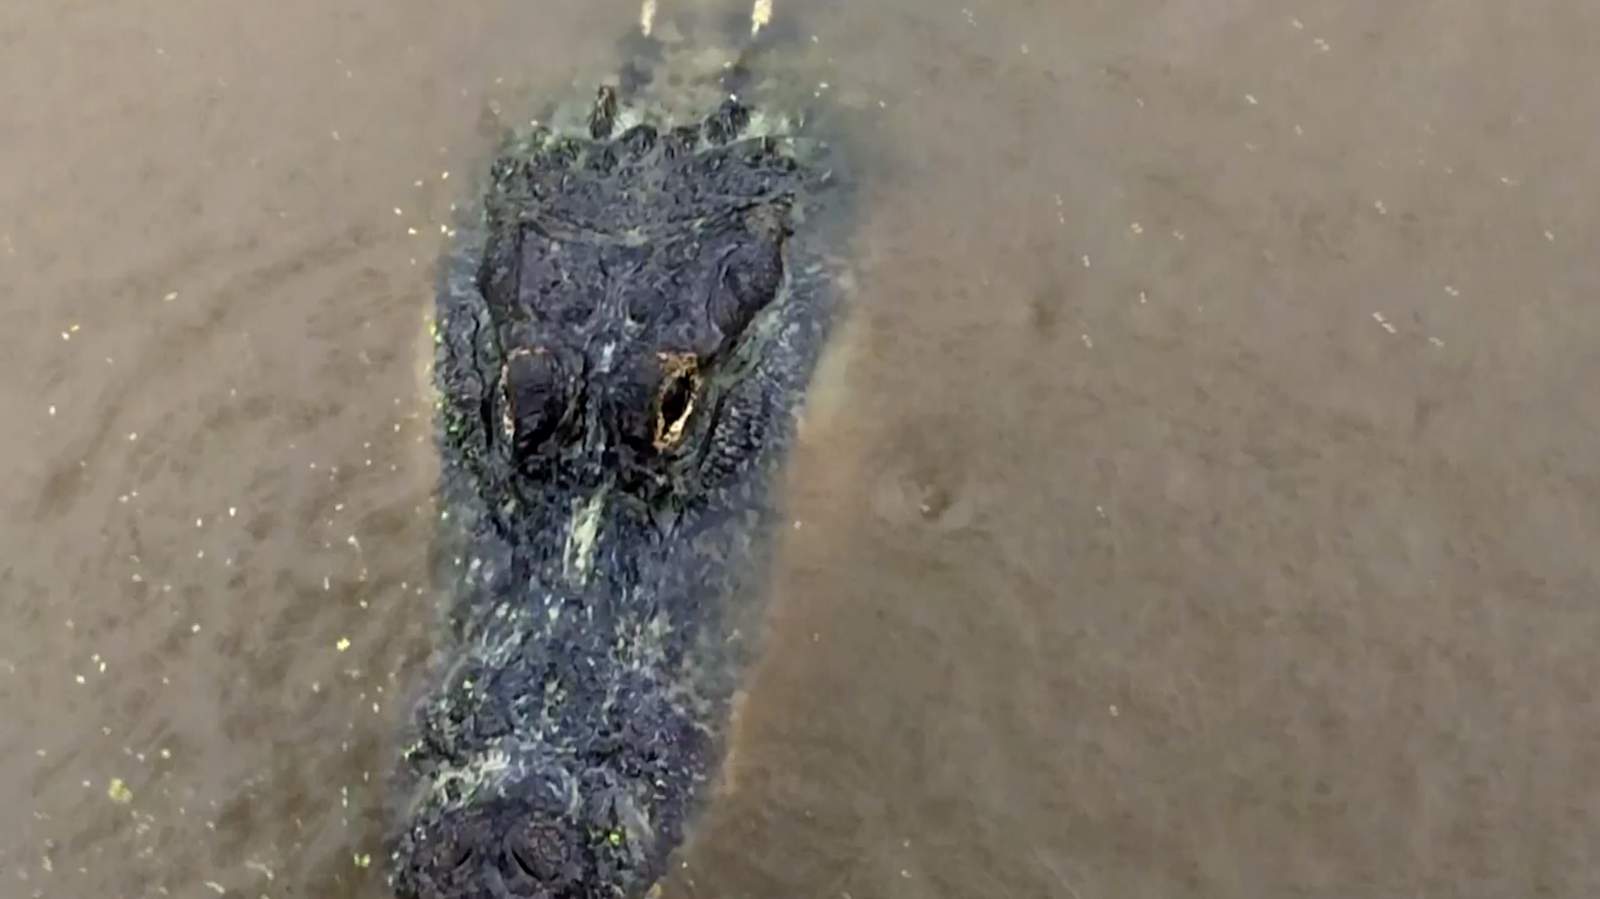 ‘Sigh of relief’: Sally spares a Mississippi gator ranch